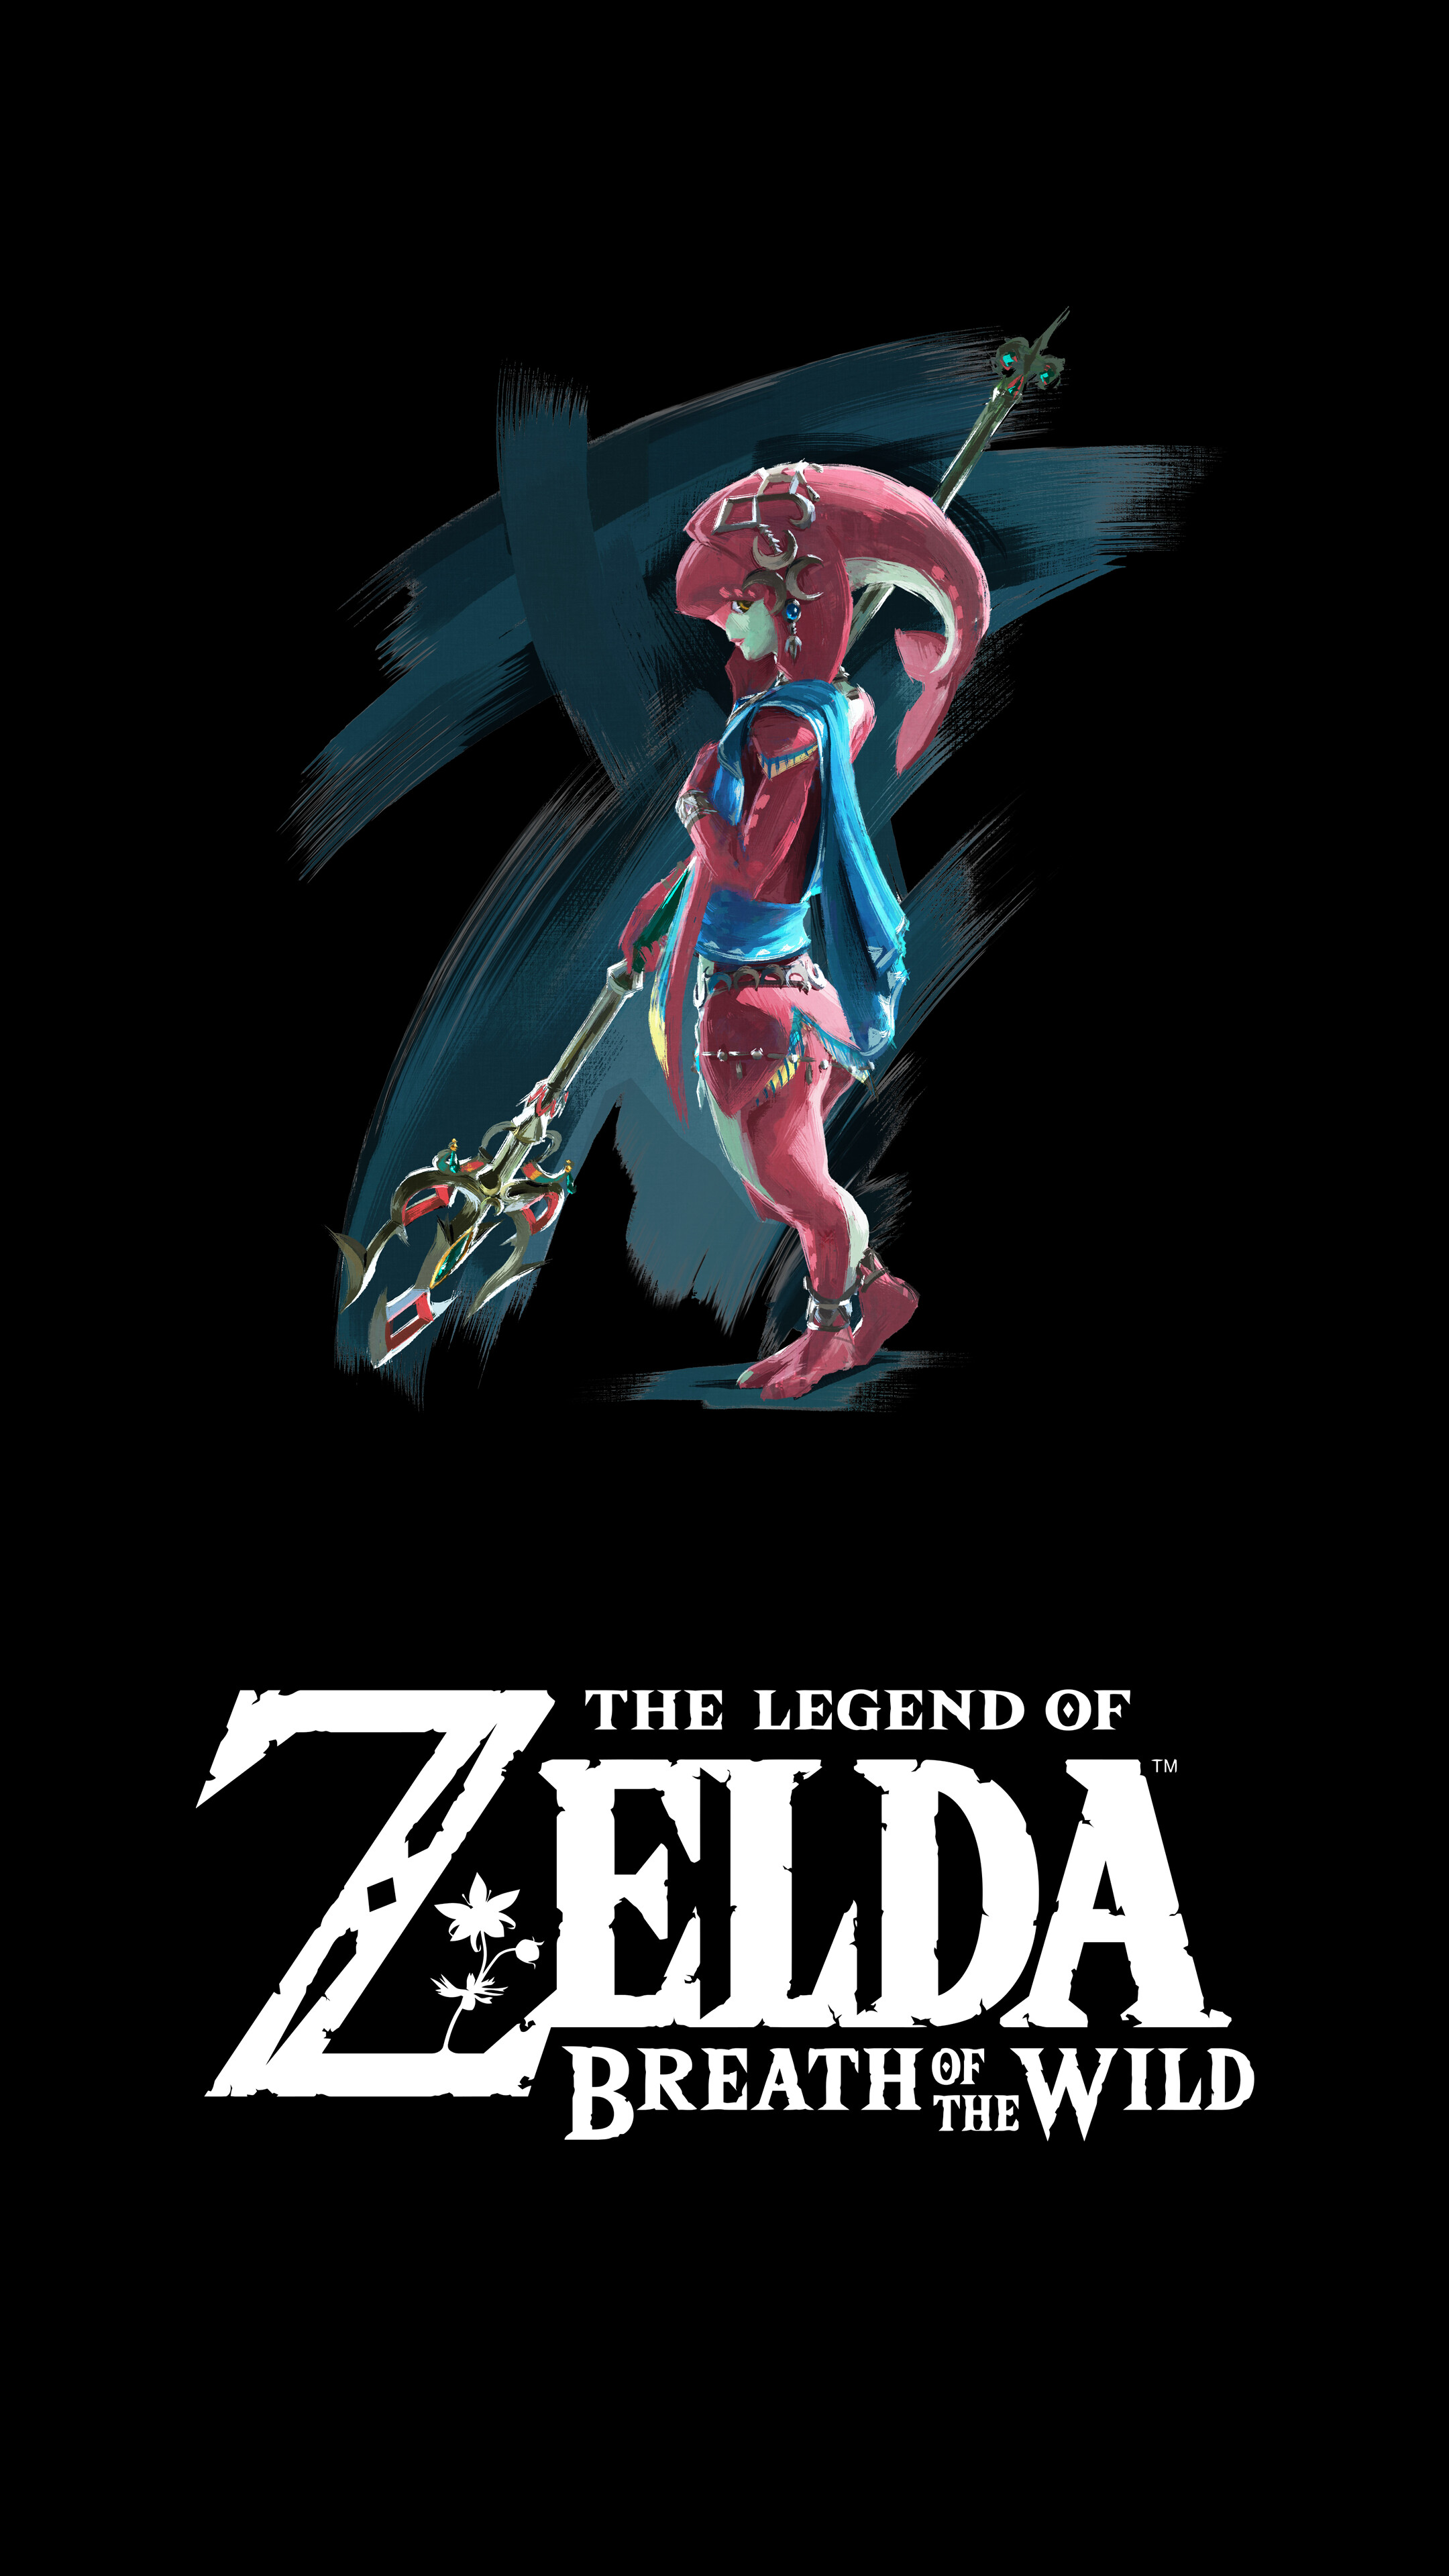 The Legend of Zelda: Breath of the Wild, Mipha, The former Champion of the Zora. 2160x3840 4K Wallpaper.